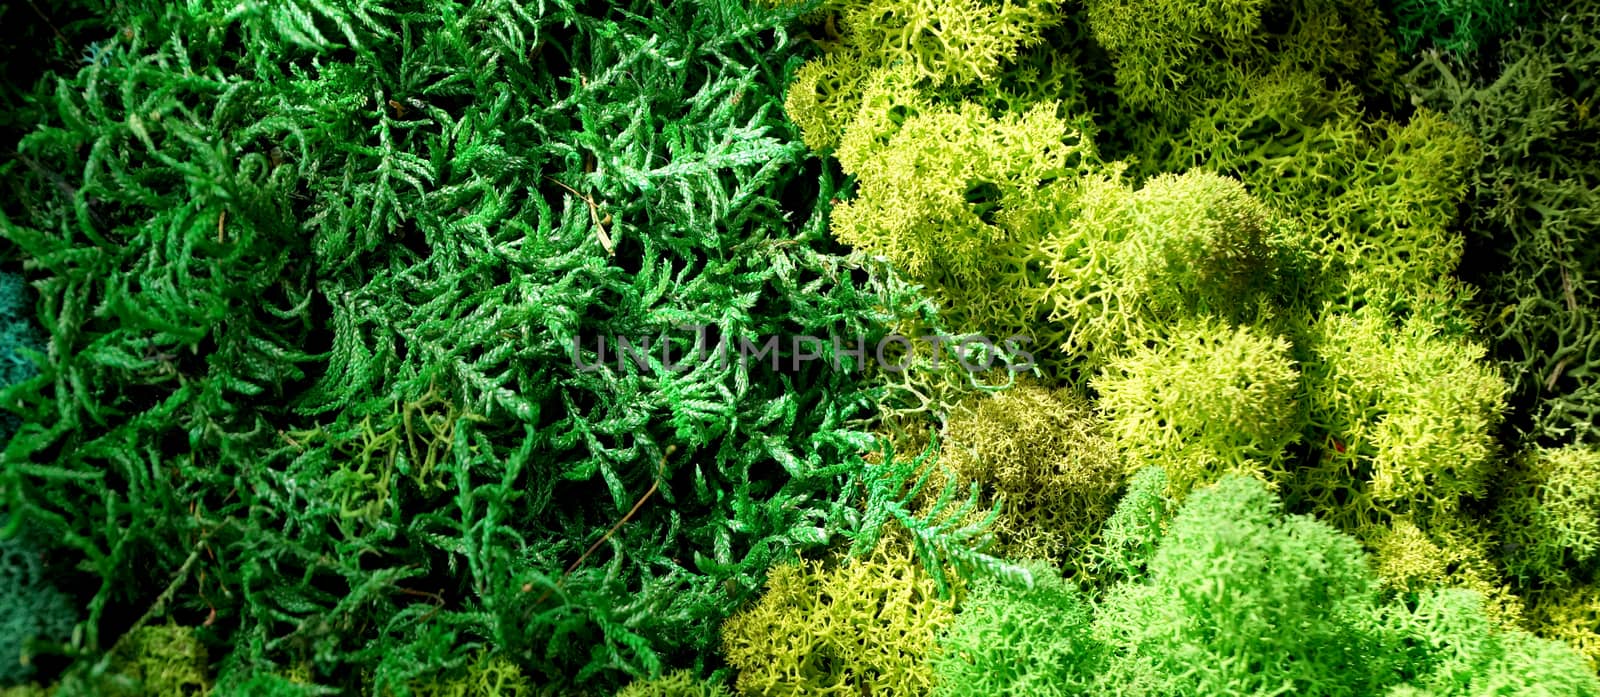 decorative stable preserved moss for interior landscaping by Annado